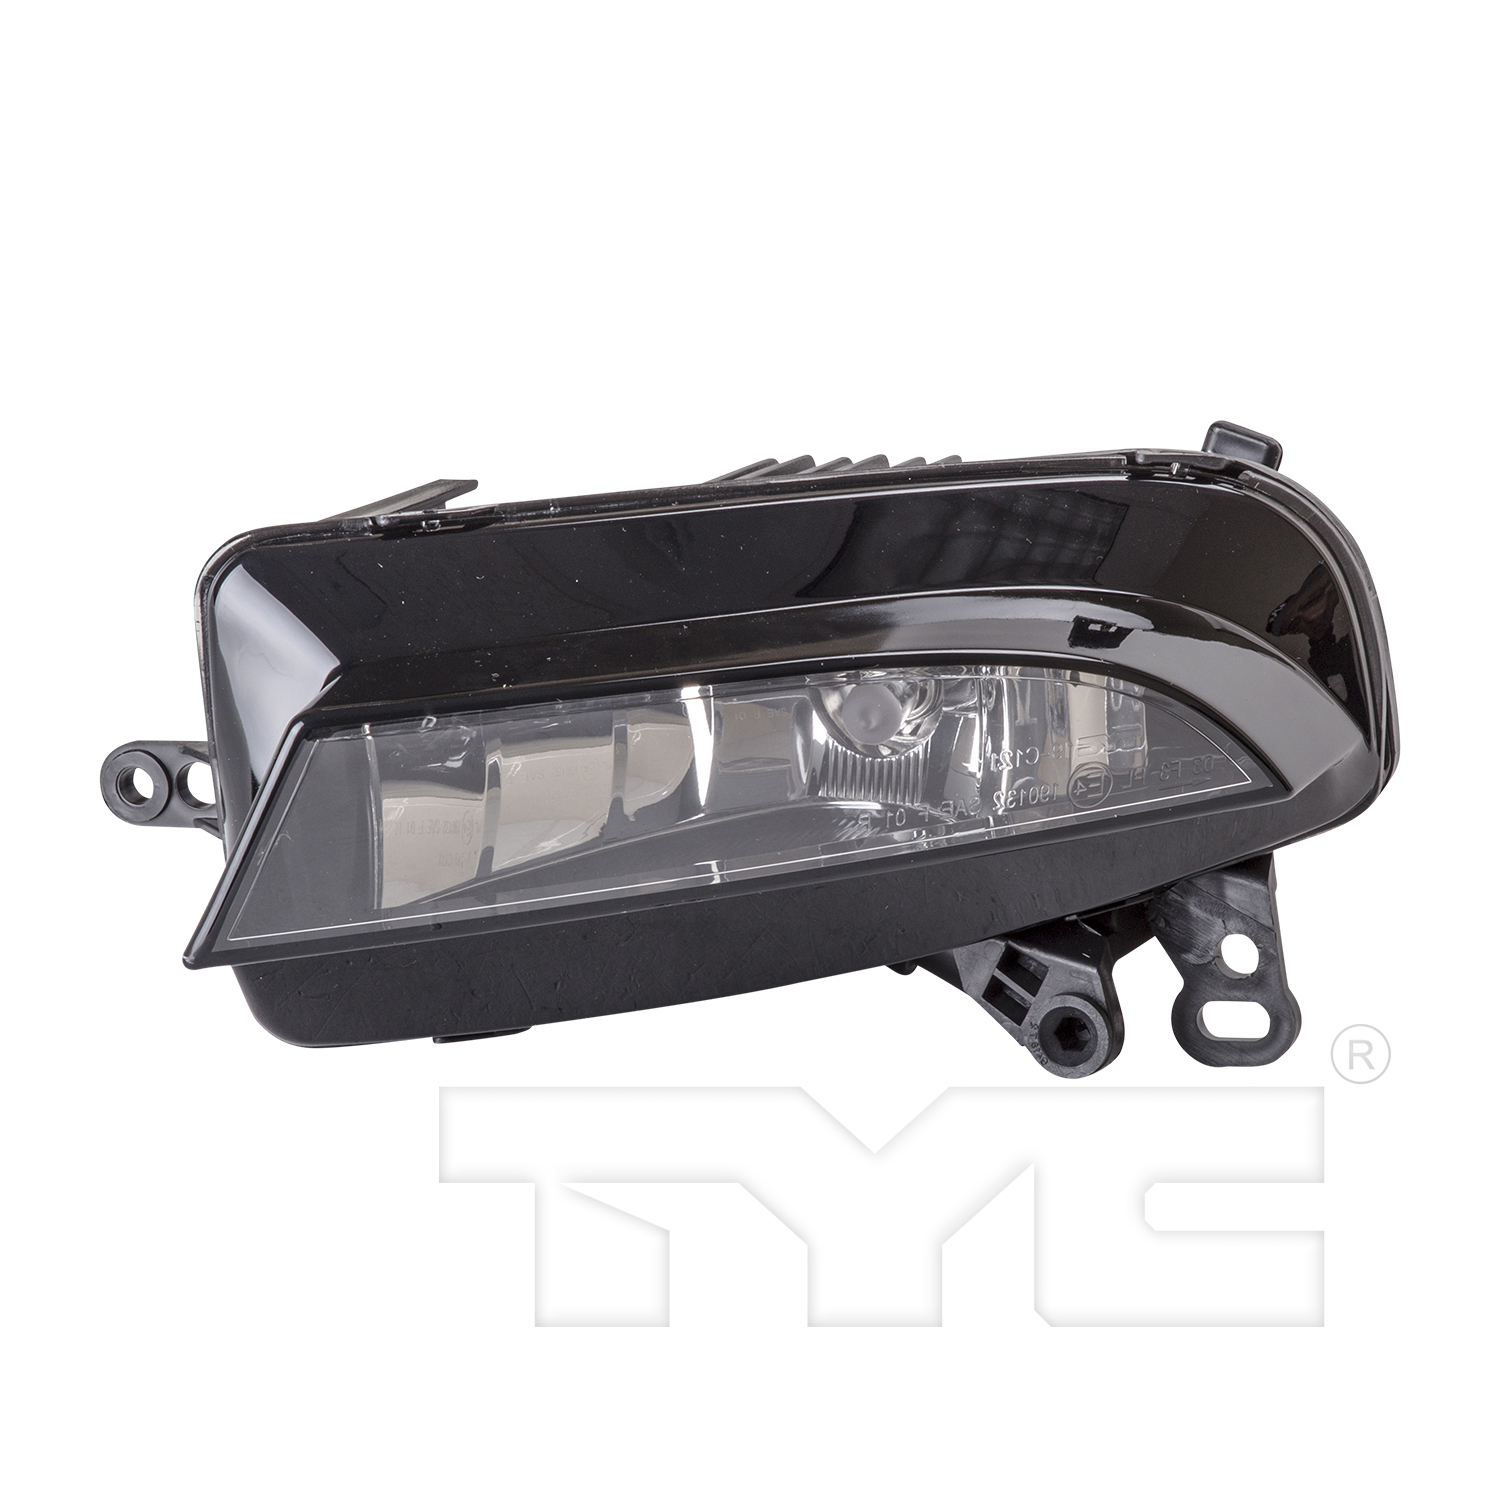 Aftermarket TAILLIGHTS for AUDI - A5 QUATTRO, A5 QUATTRO,13-17,LT Fog lamp assy